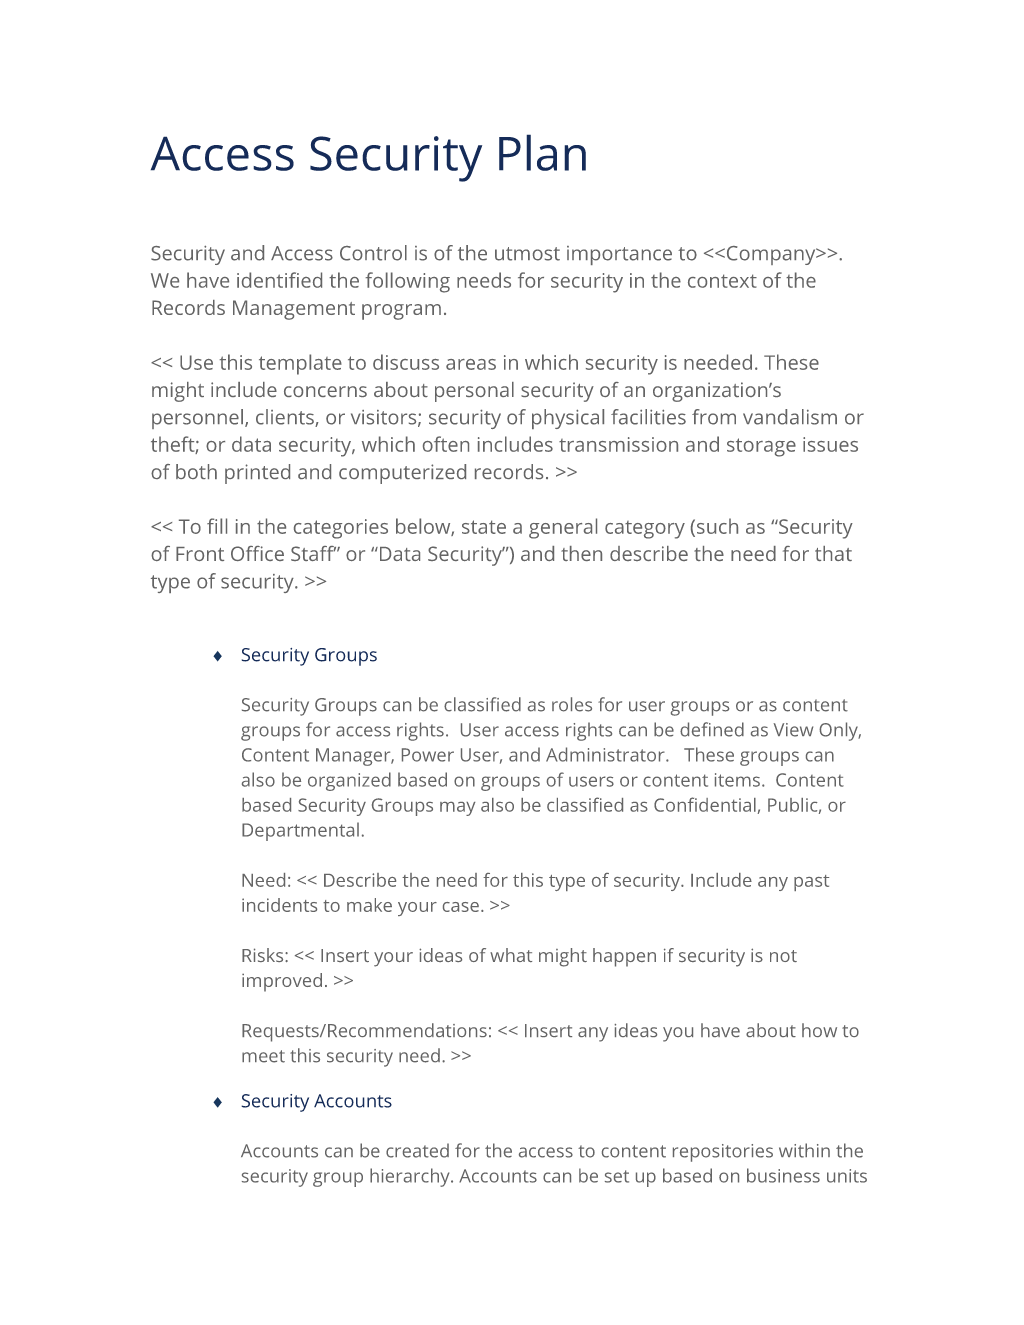 Records Access Security Plan (Expanded)